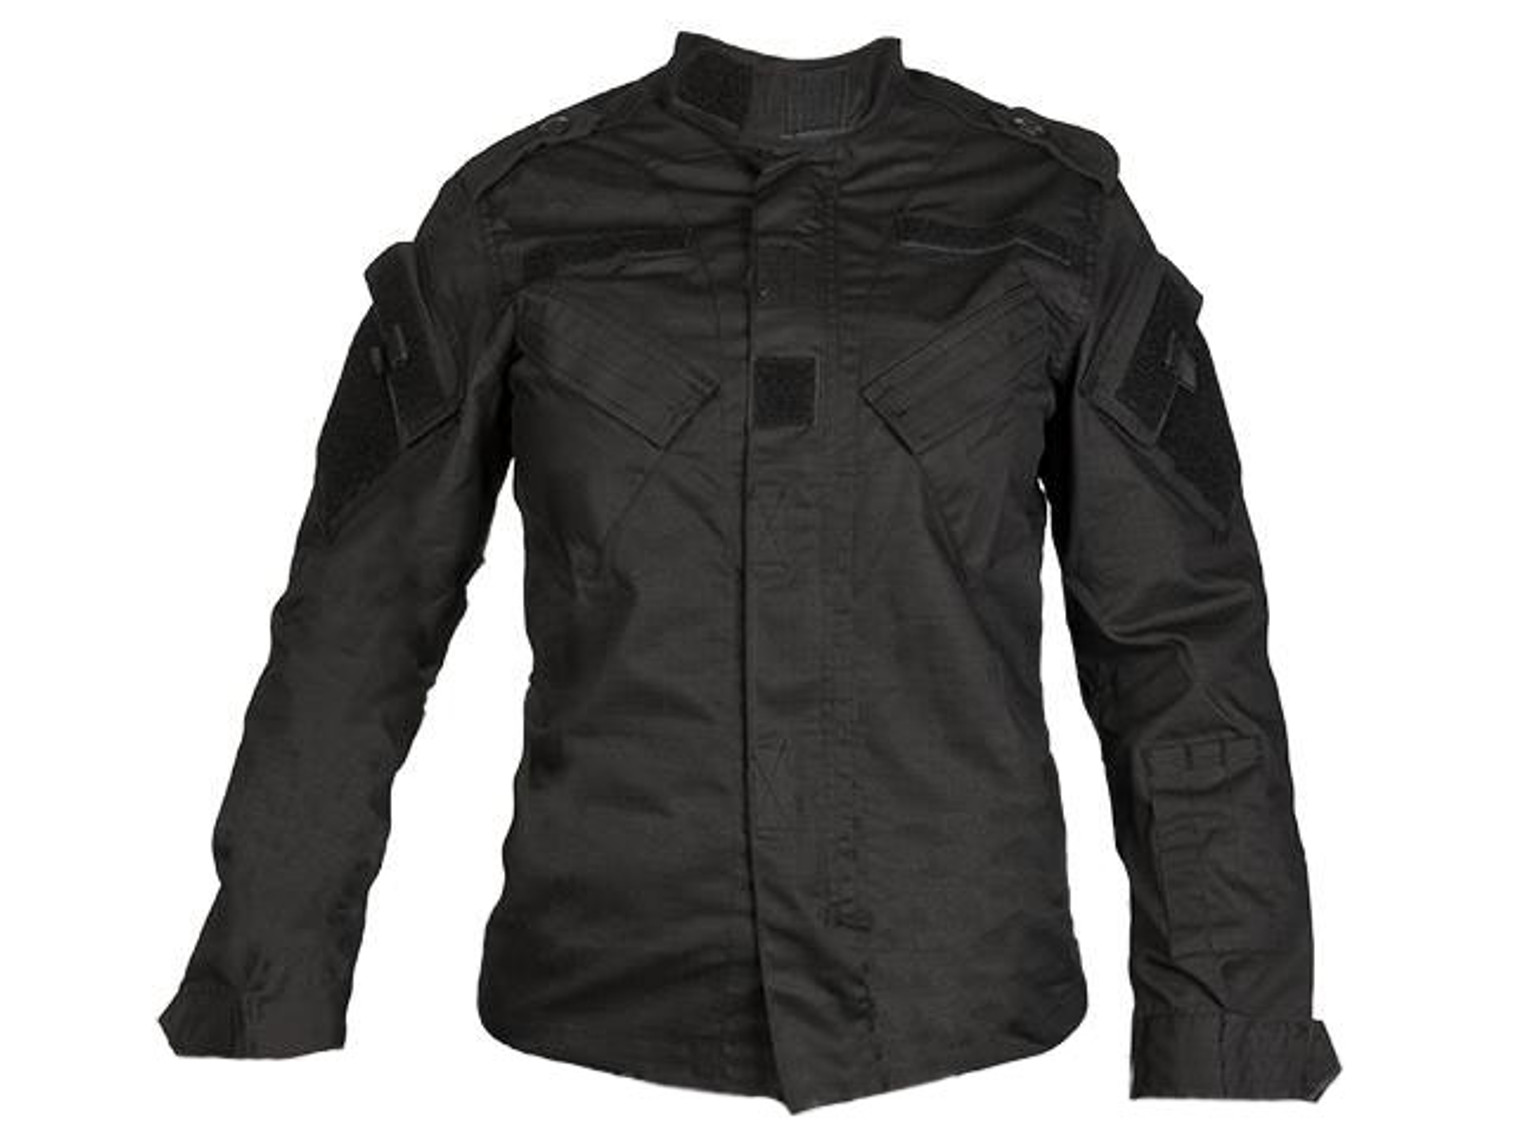 Laylax Ghost Gear Ladies Tactical BDU Jacket - Black (Size: Large)